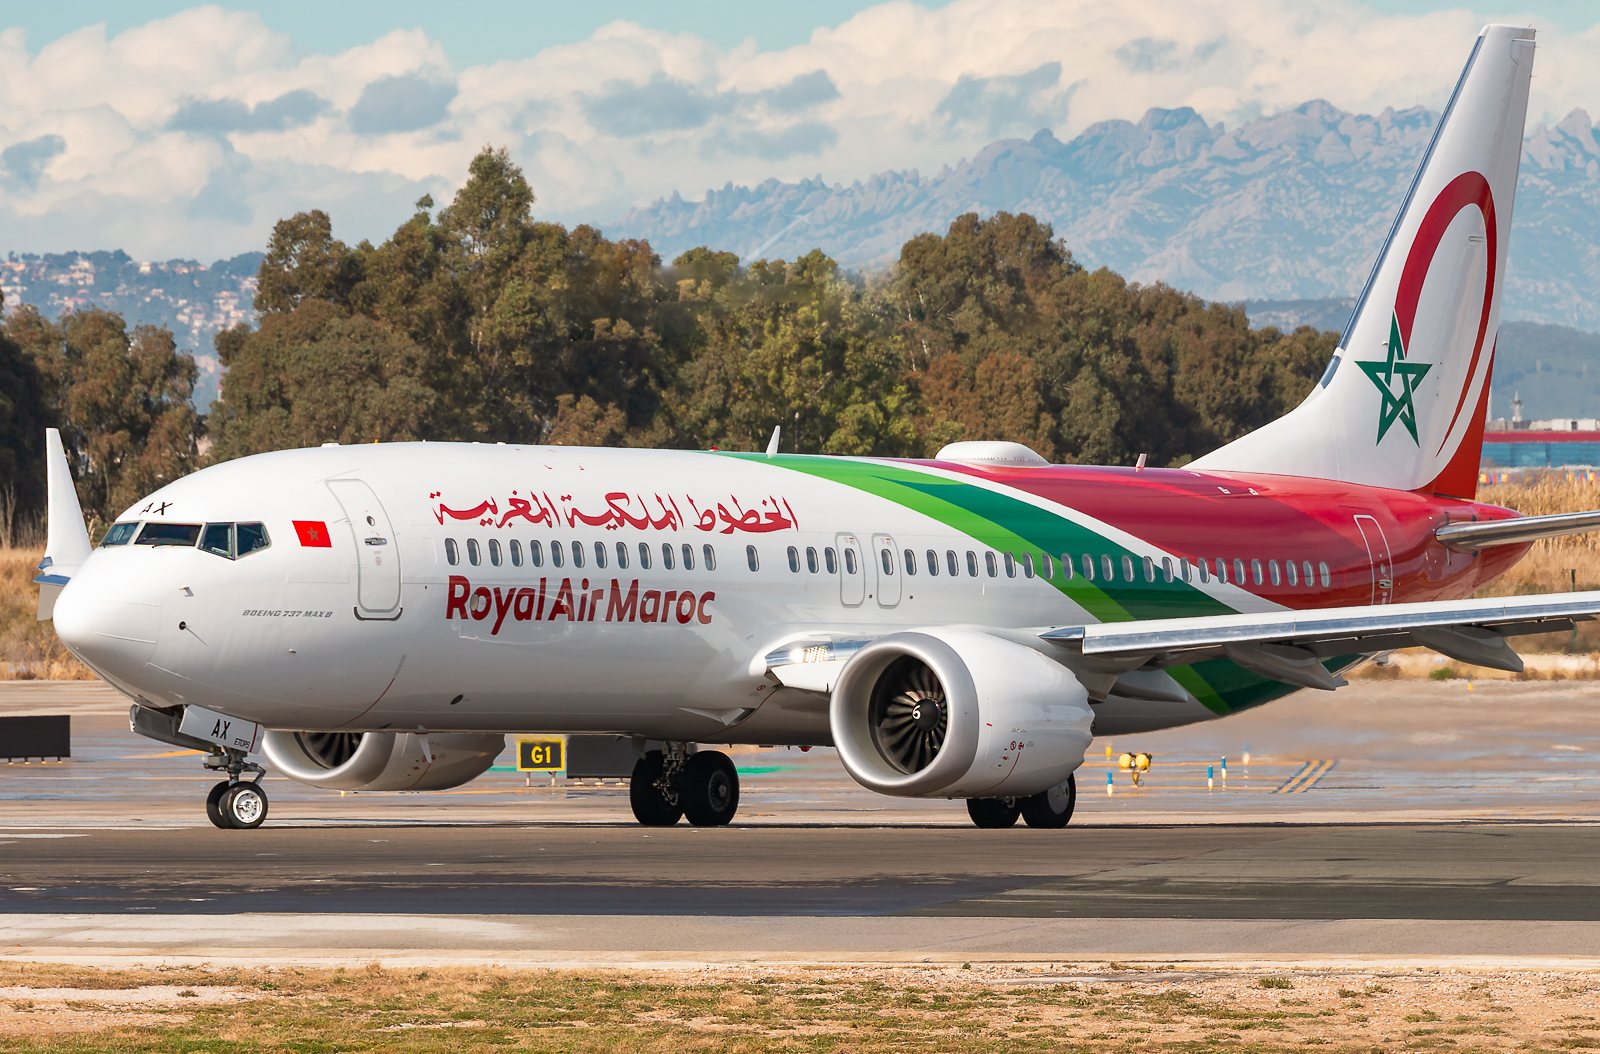 Royal Air Maroc: Tickets sold out for the month of July.